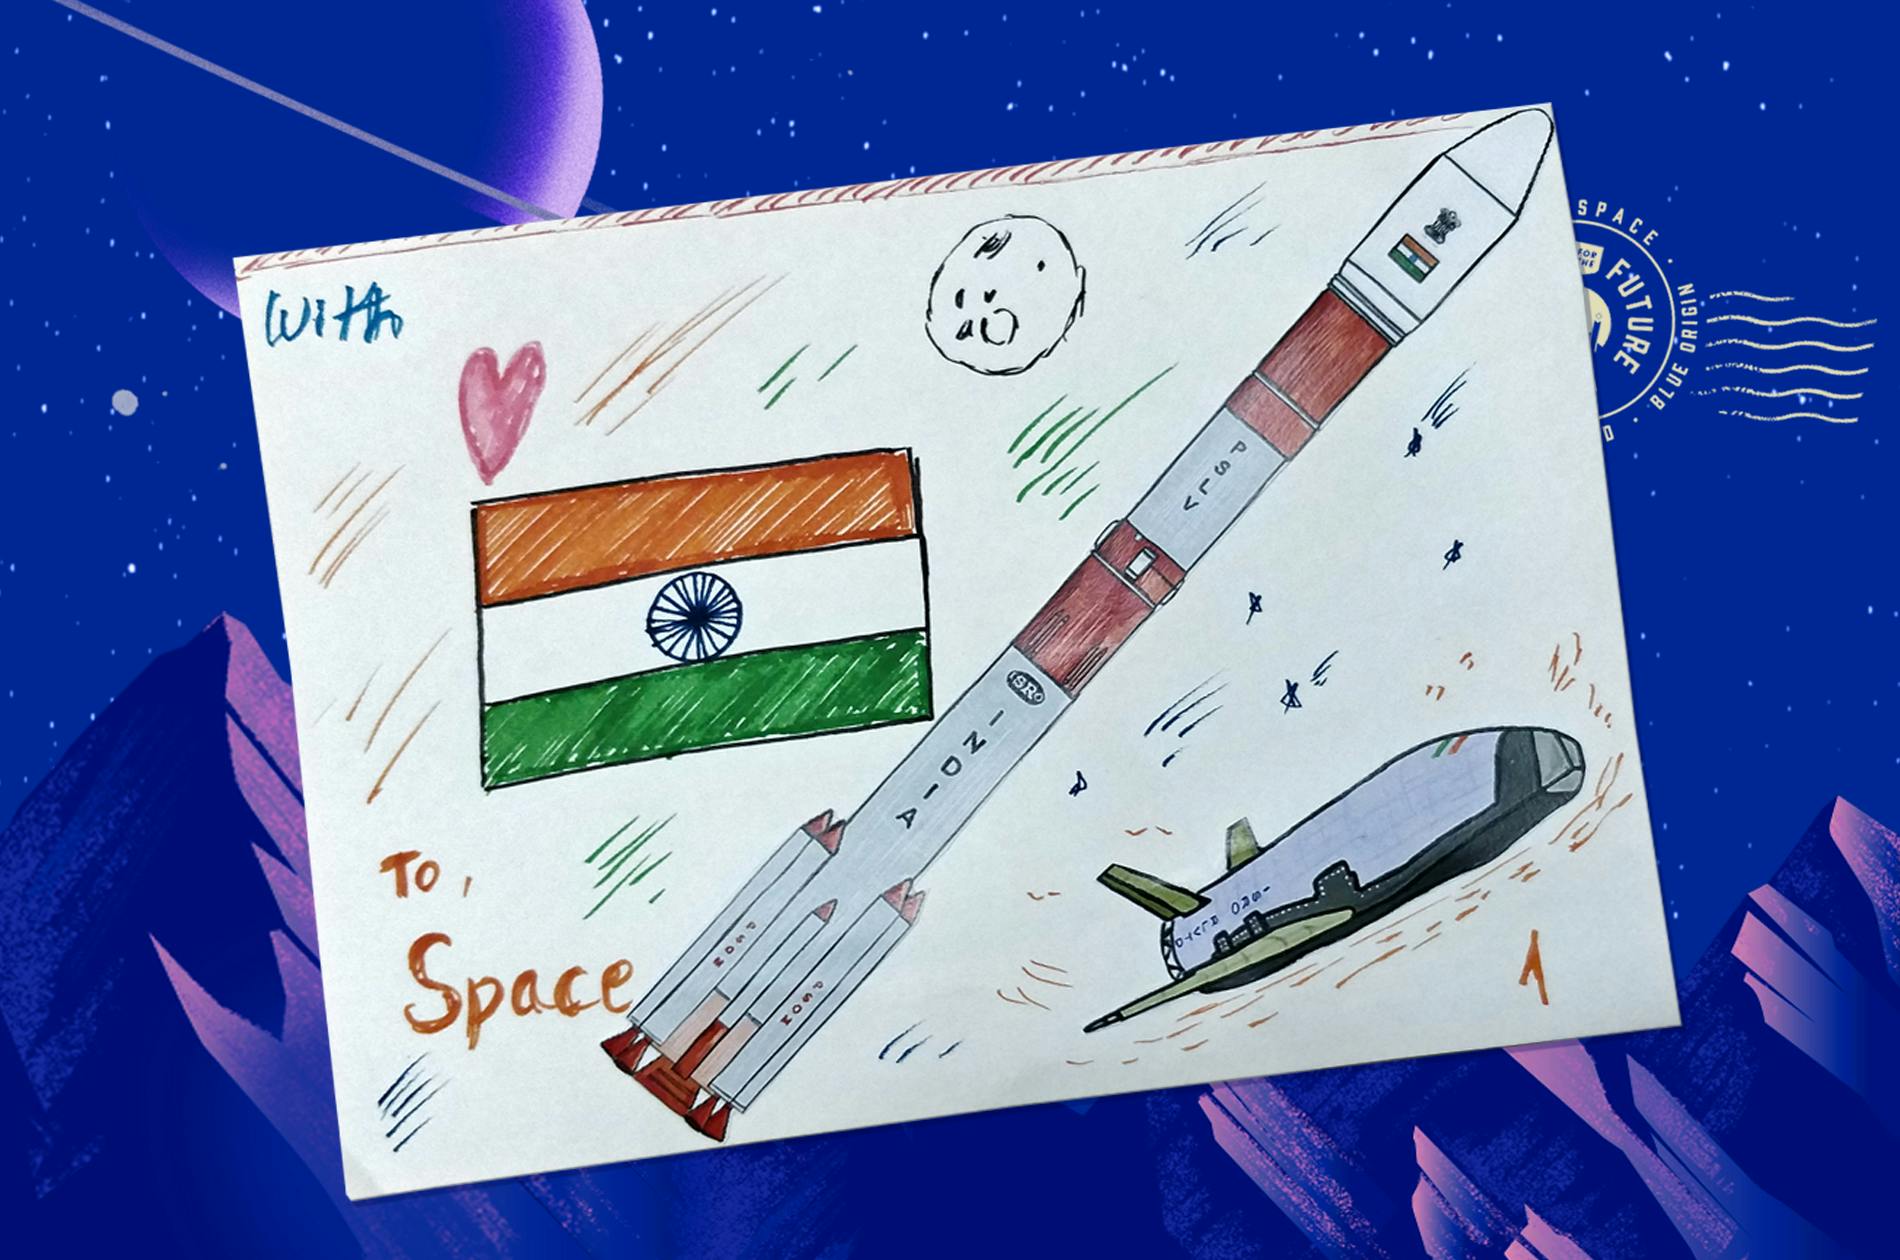 Drawn postcard featuring the Indian flag and multiple rockets